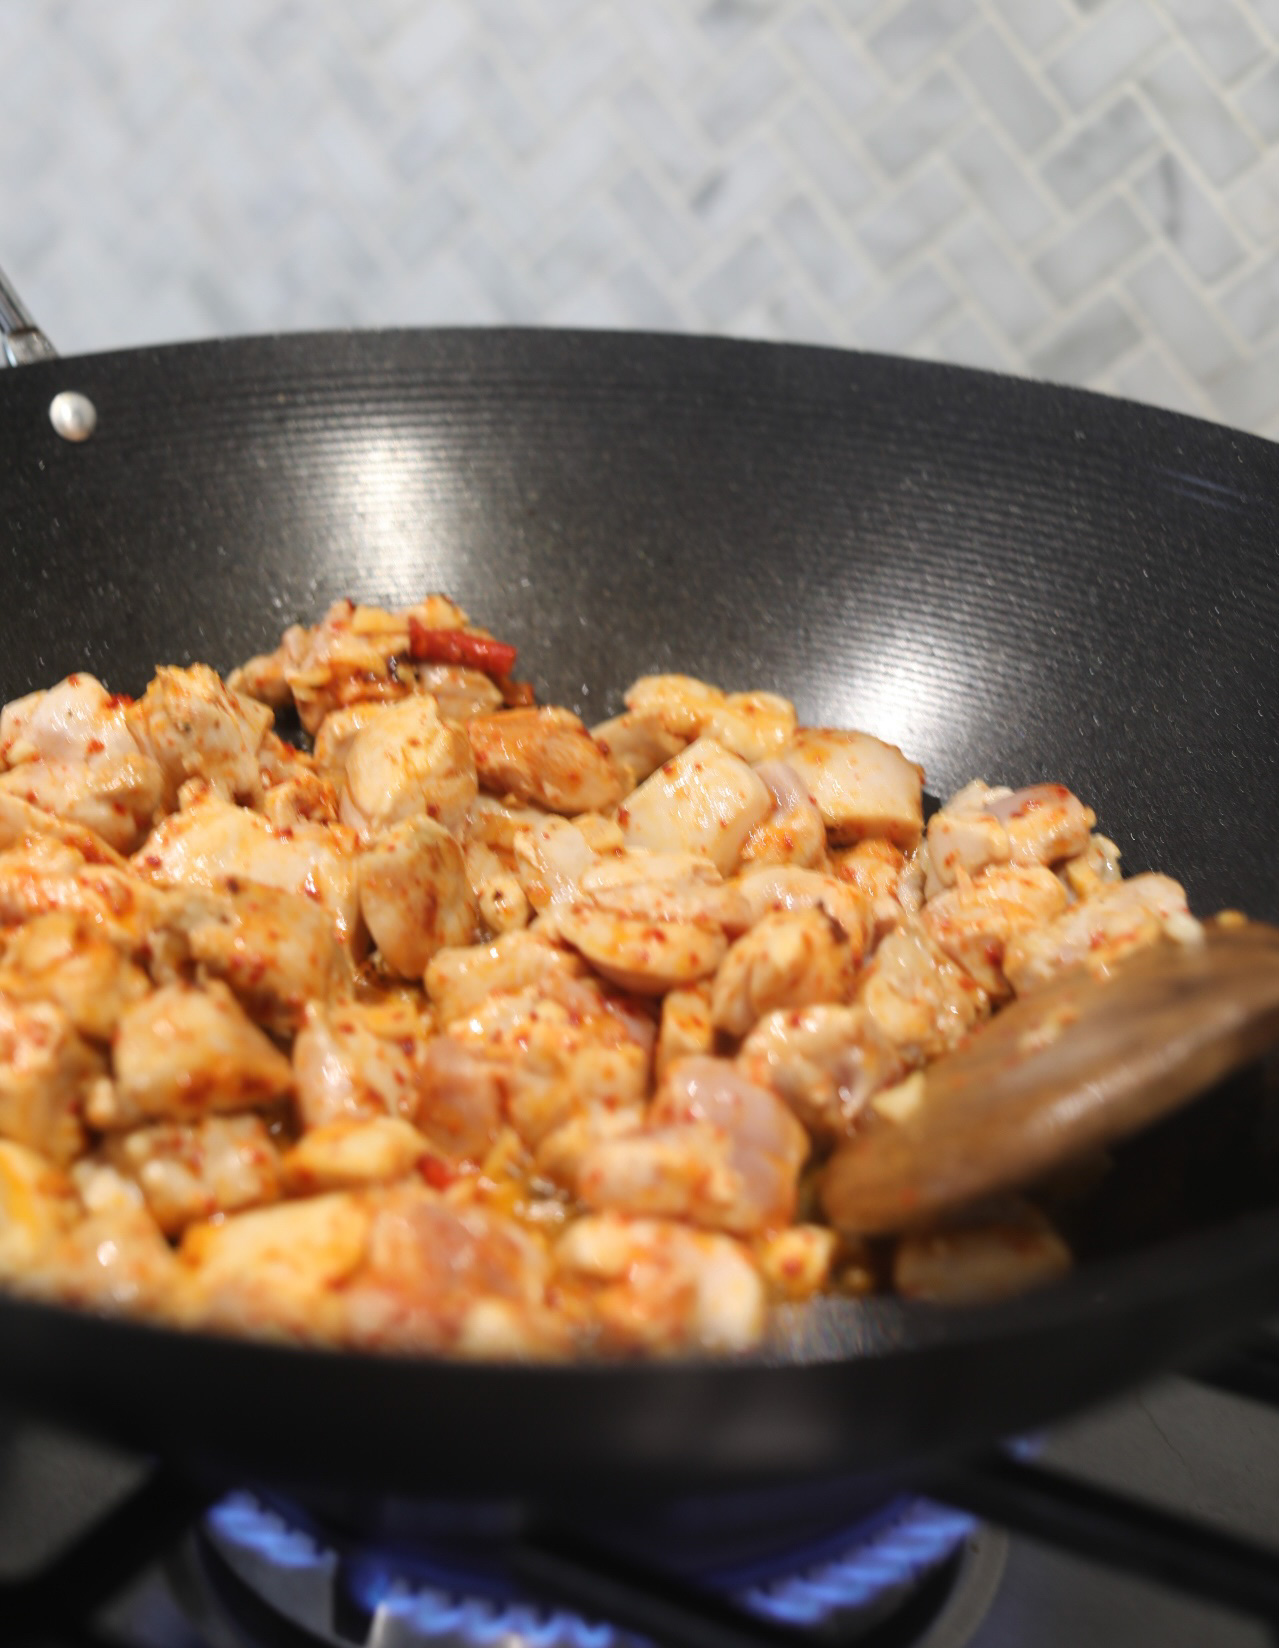 Chicken thighs cooking in a black wok with a wooden spoon.